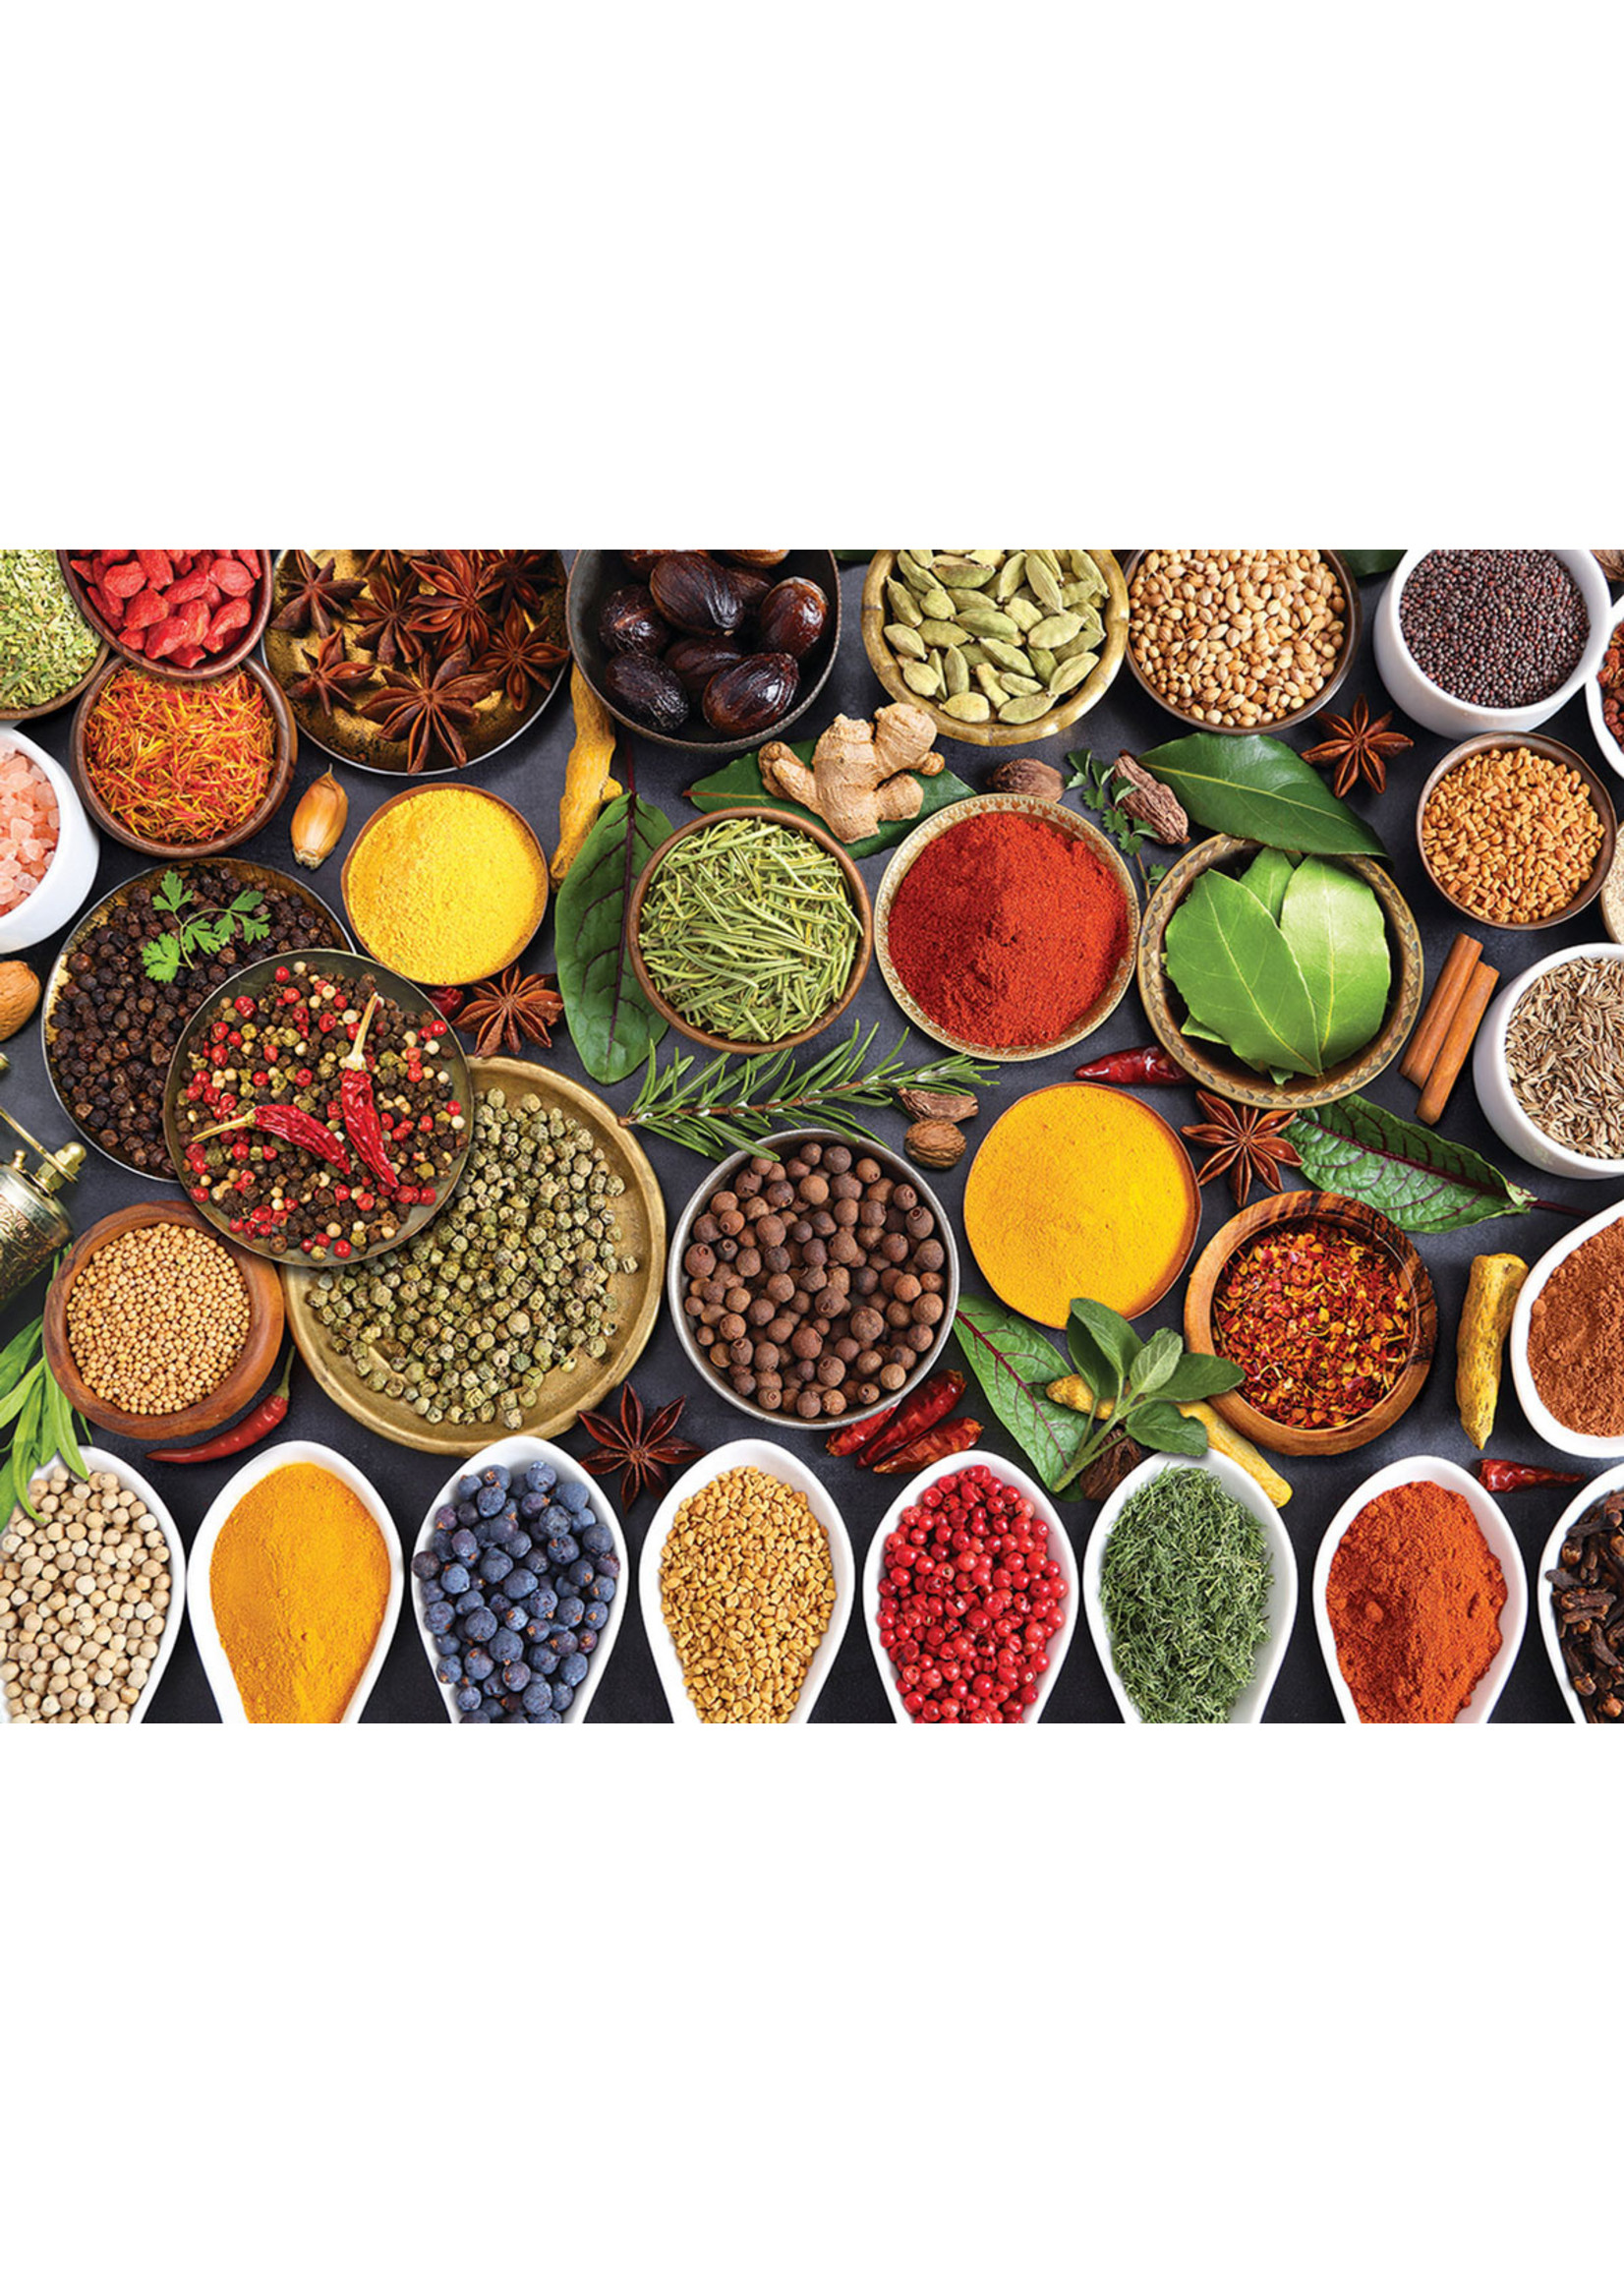 Eurographics "Spicy Table" 1000 Piece Puzzle